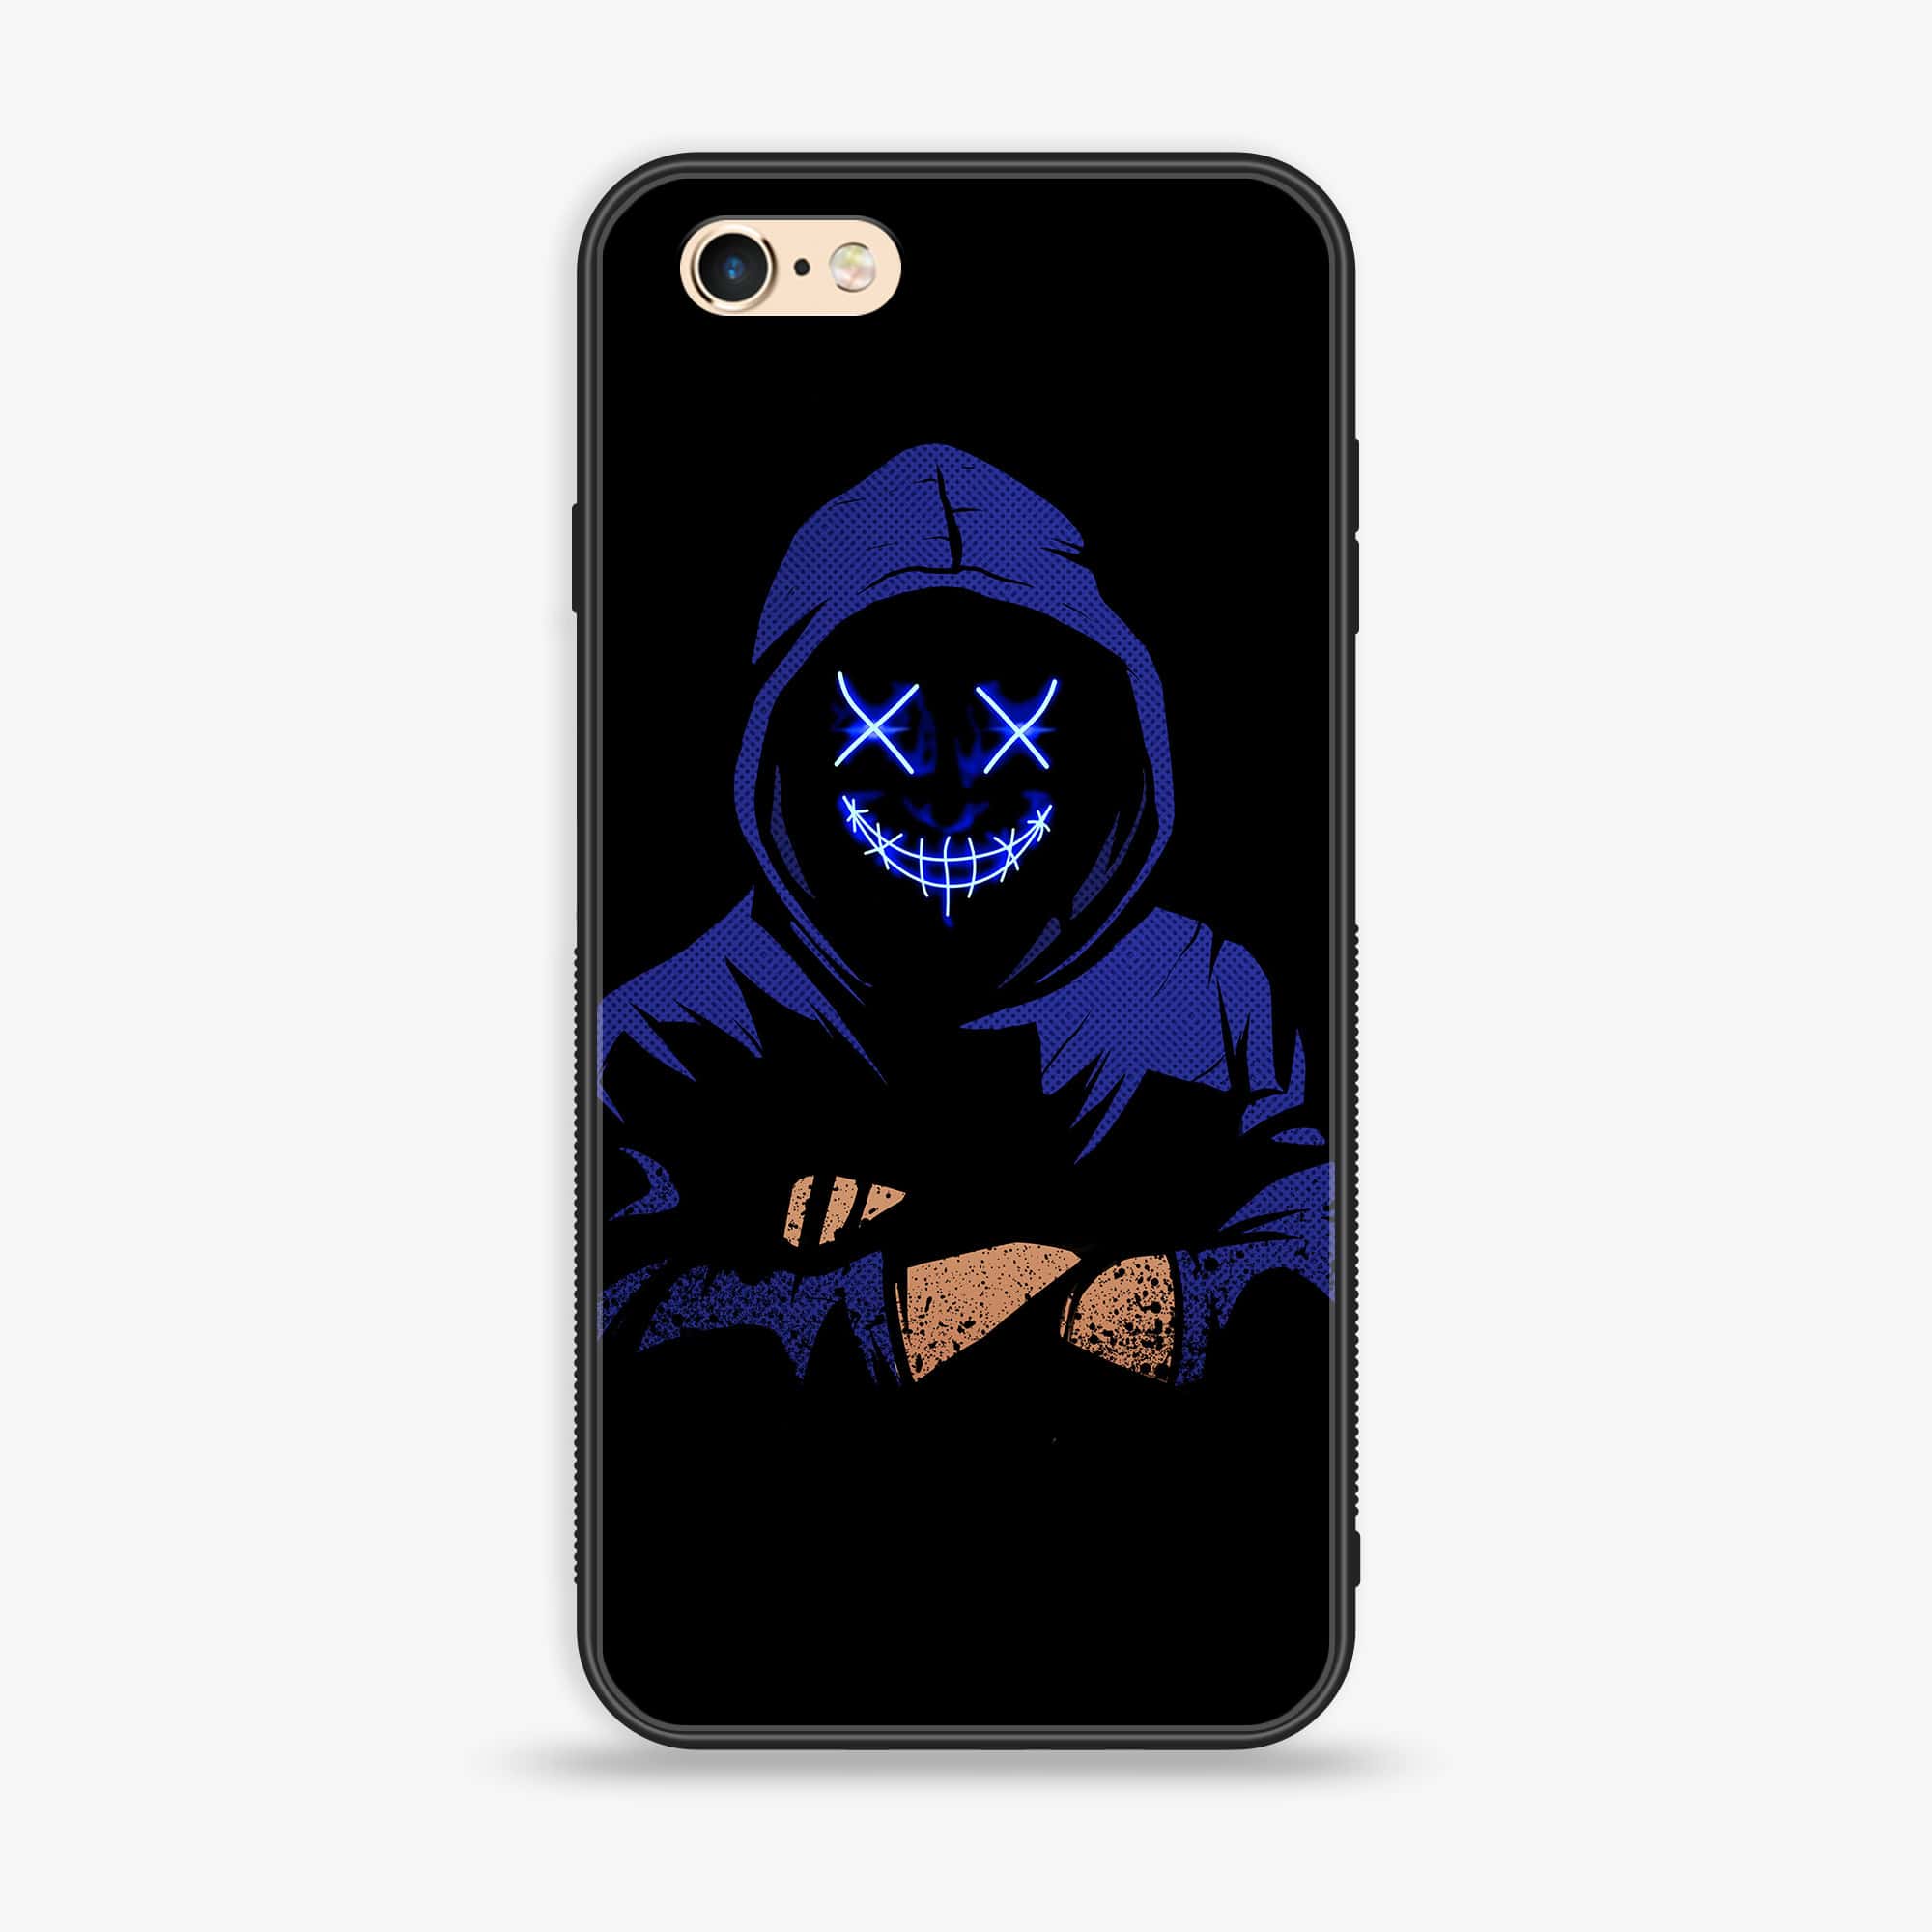 iPhone 6 - Anonymous 2.0 Series - Premium Printed Glass soft Bumper shock Proof Case